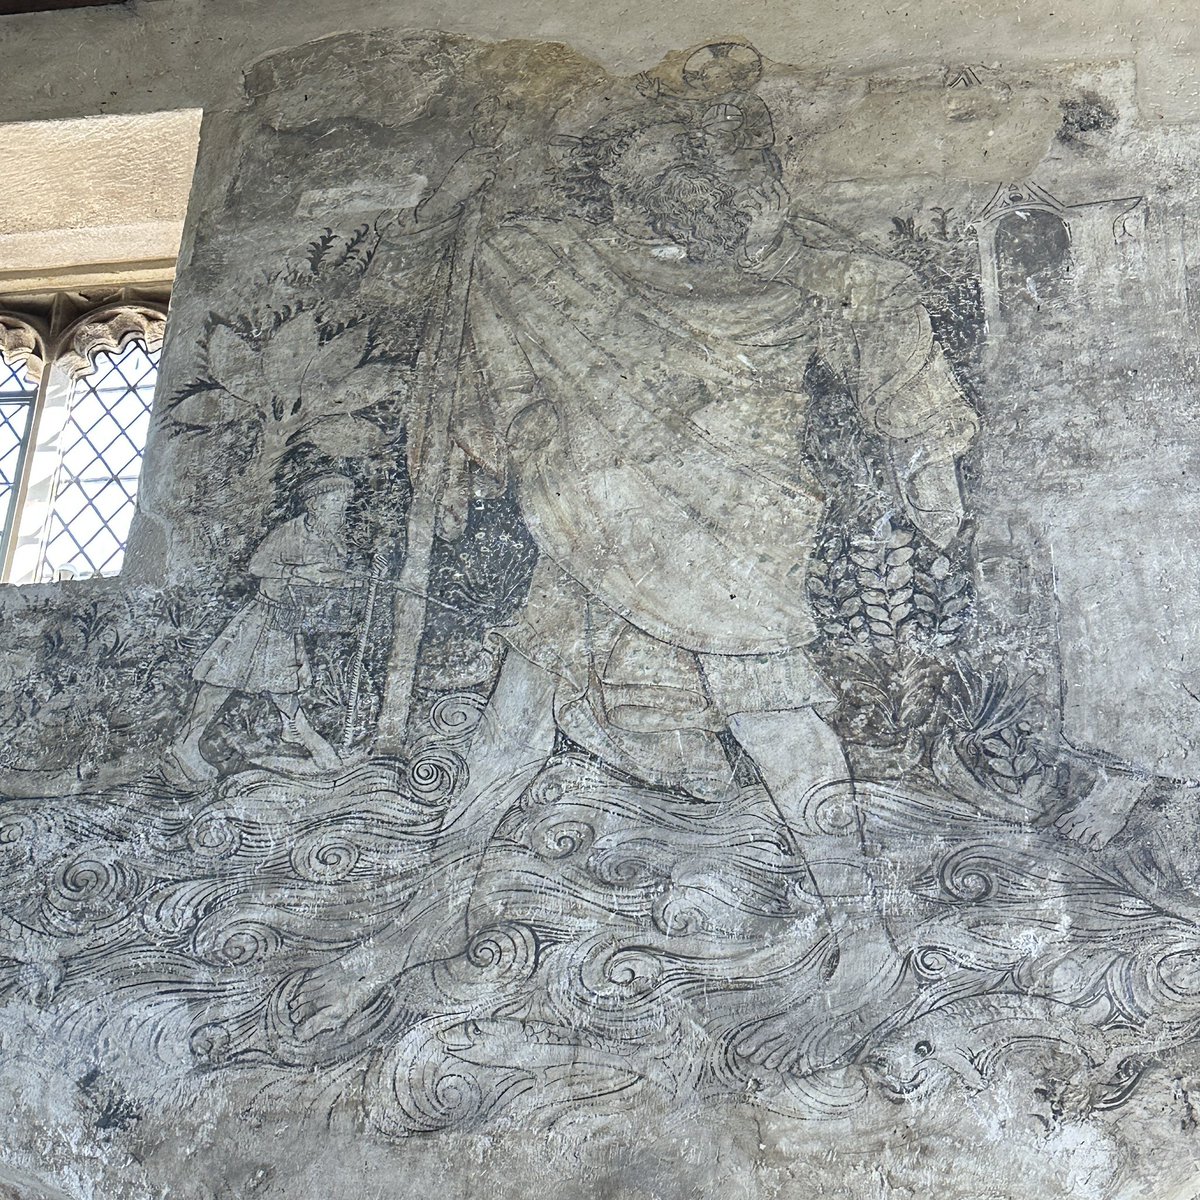 15th century wall painting of St Christopher in the chapel at Haddon Hall, Derbyshire 

#SeptemberSaints 
#medieval #wallpainting